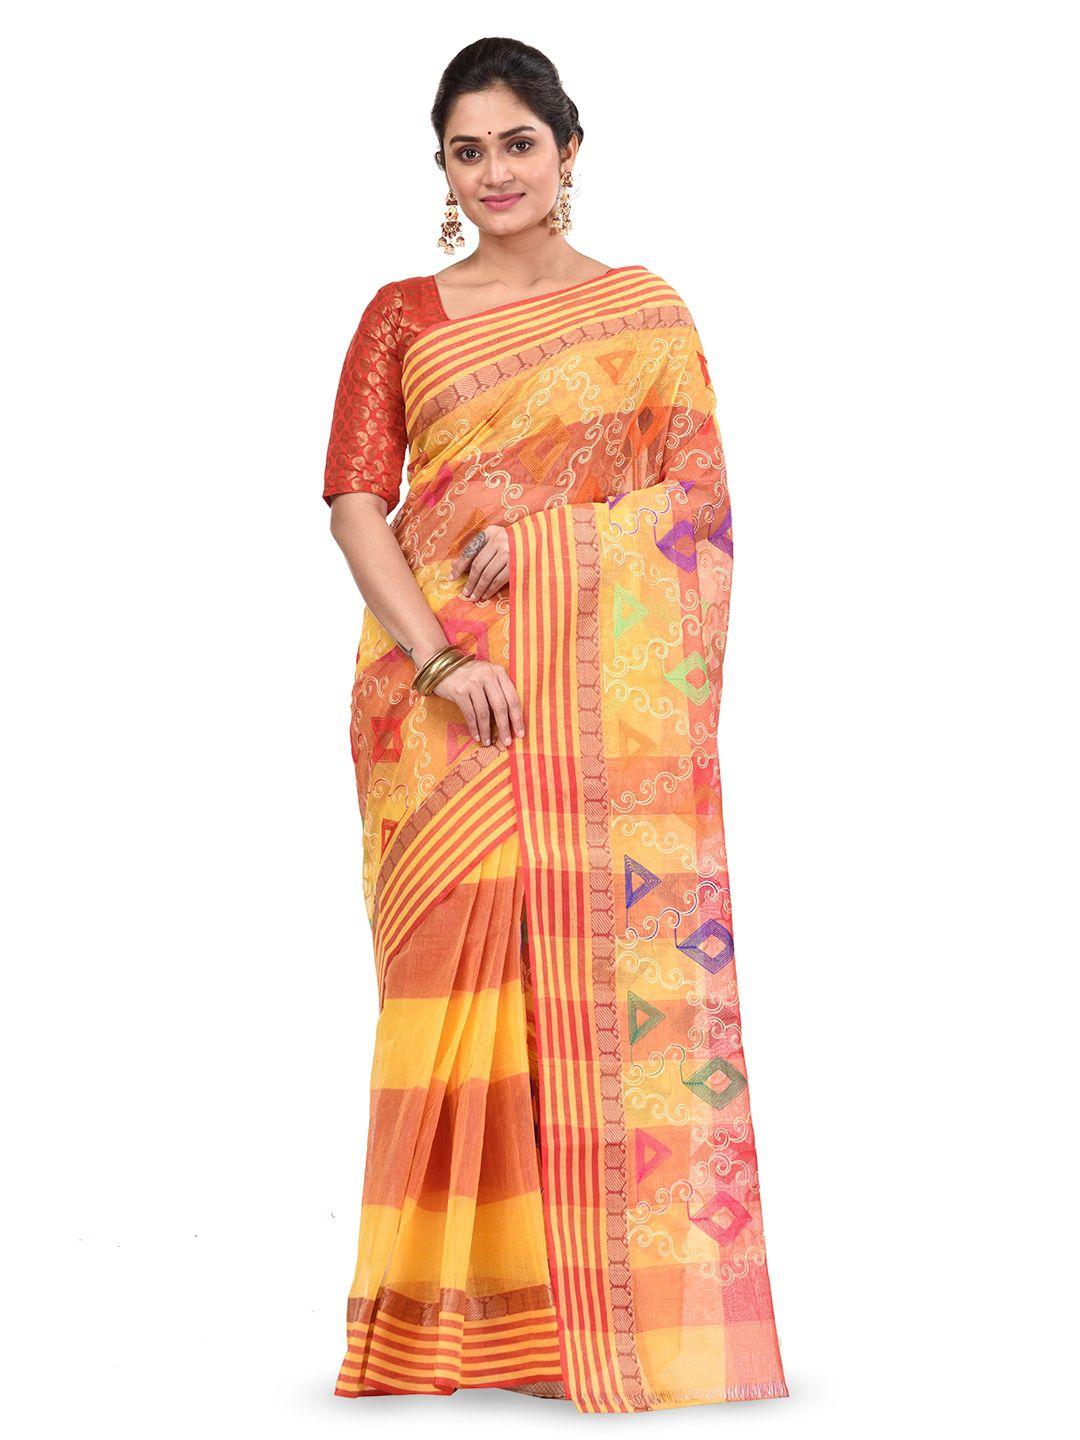 dipdiya floral embroidered pure cotton taant saree